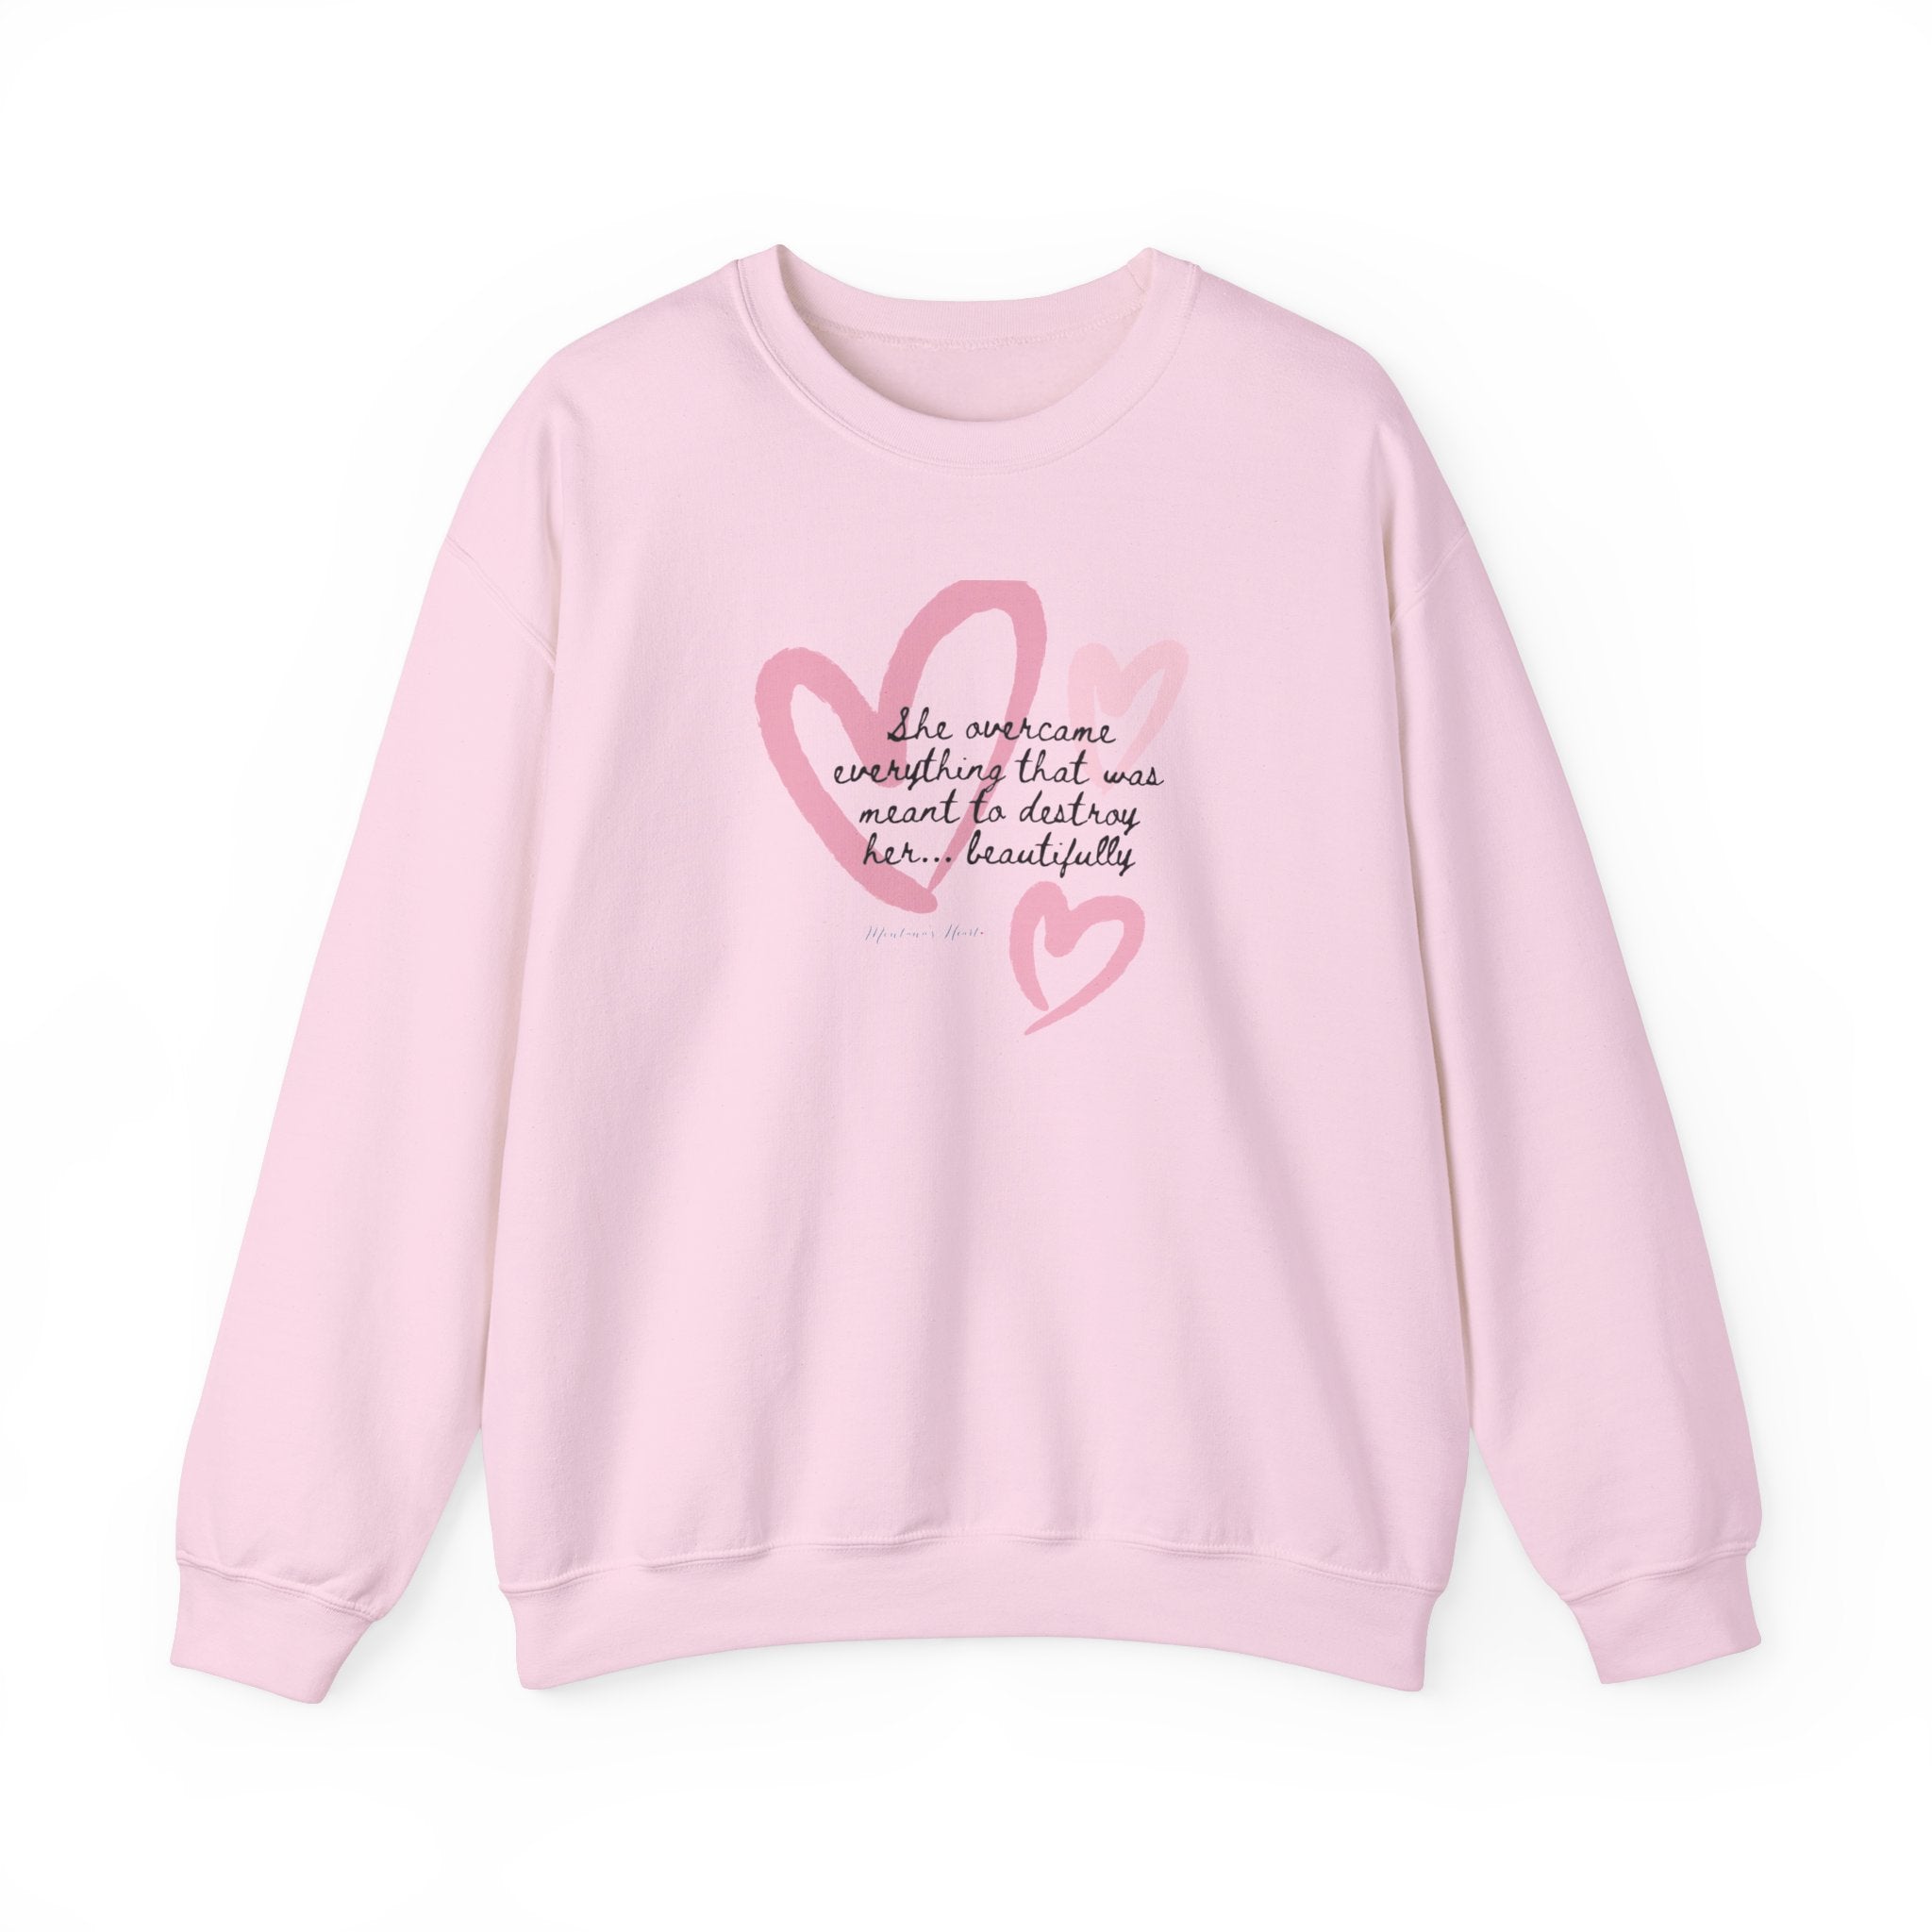 She overcame everything that was meant to destroy her.. beautifully ladies inspirational sweatshirt